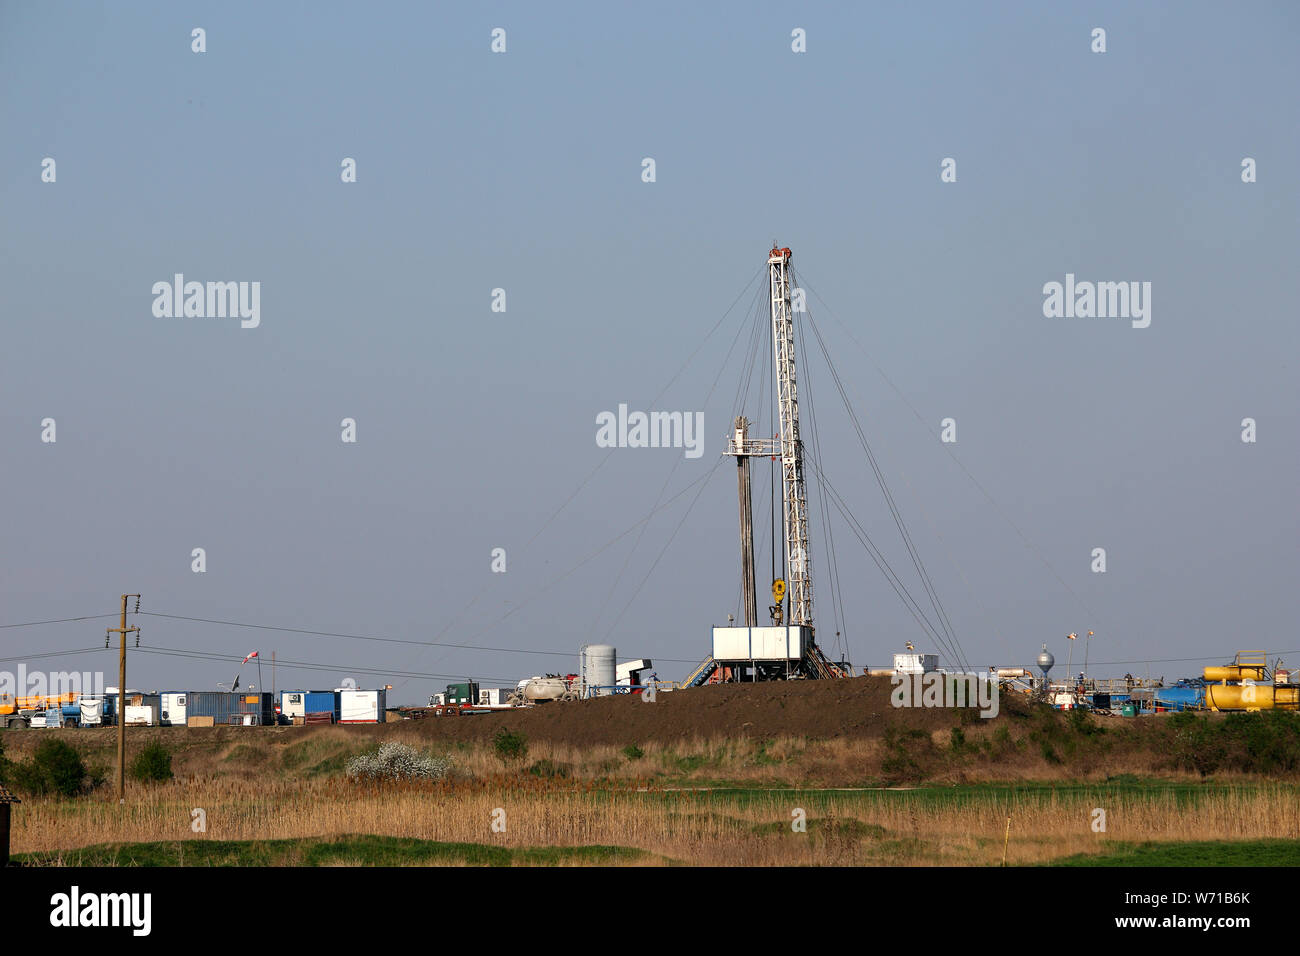 land oil and gas drilling rig in oilfield industry Stock Photo